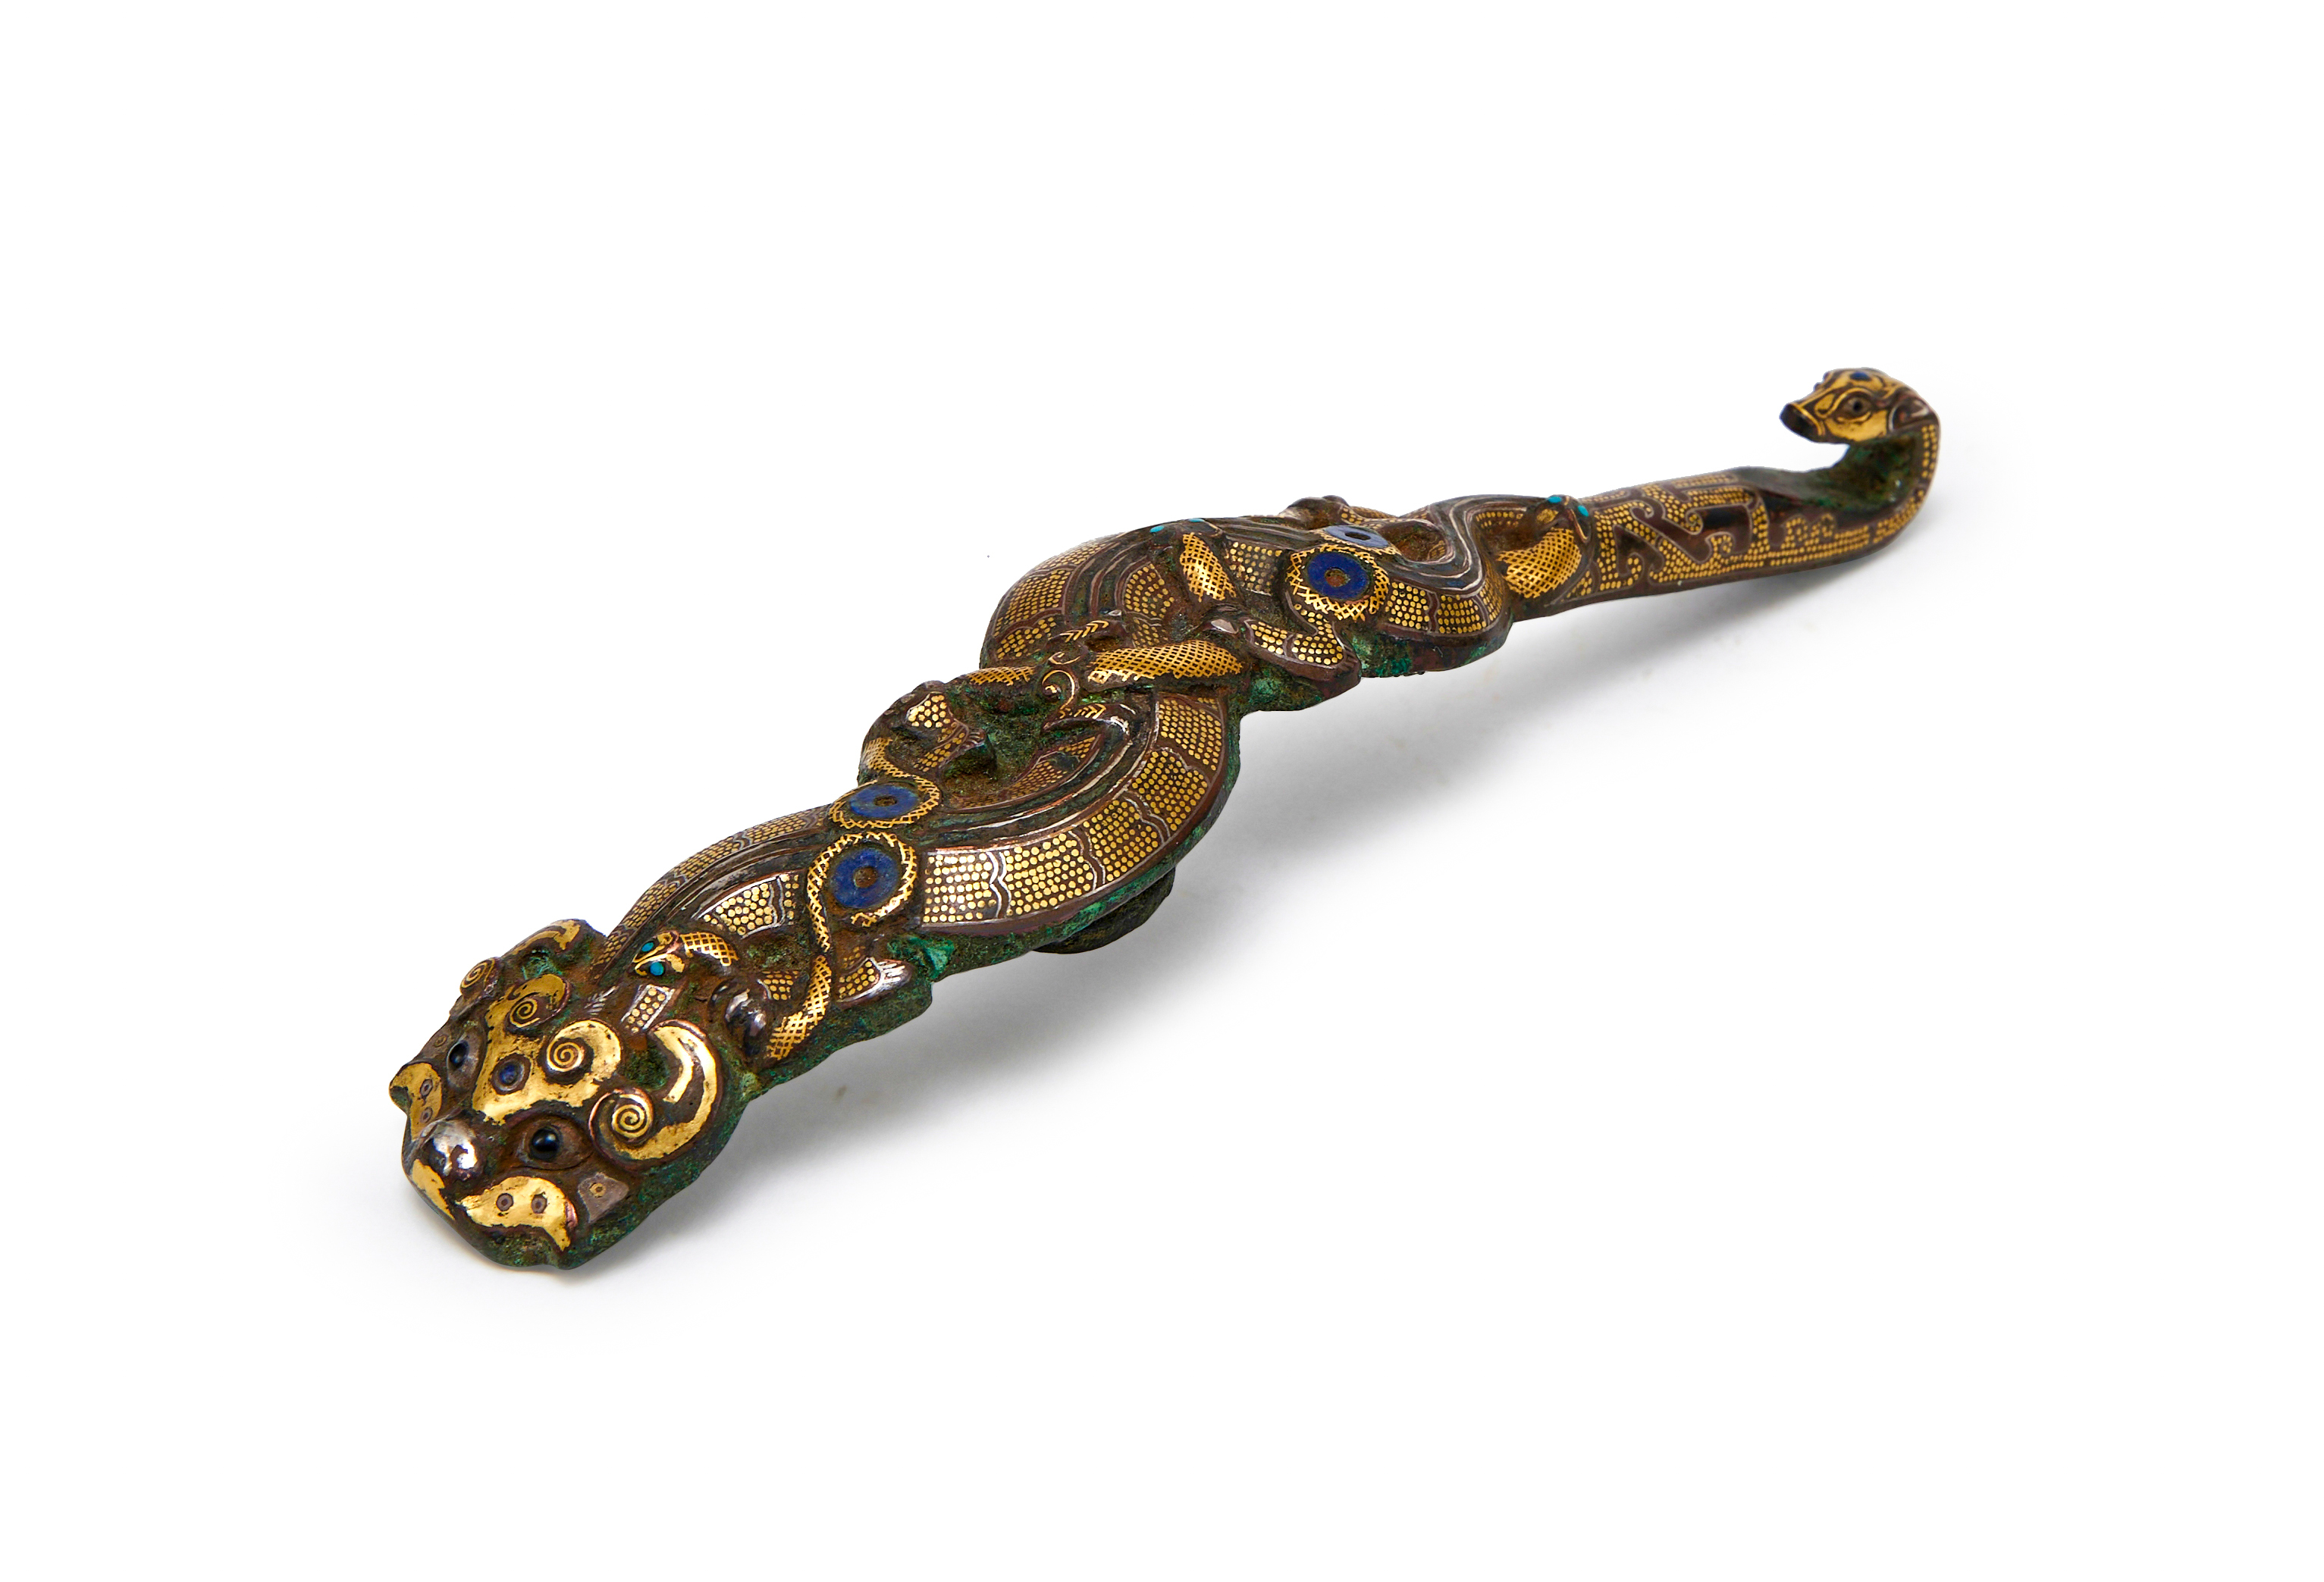 A TURQUOISE AND GOLD-INLAID BRONZE BELT HOOK WARRING STATES PERIOD, 4TH-3RD CENTURY BC - Image 3 of 9